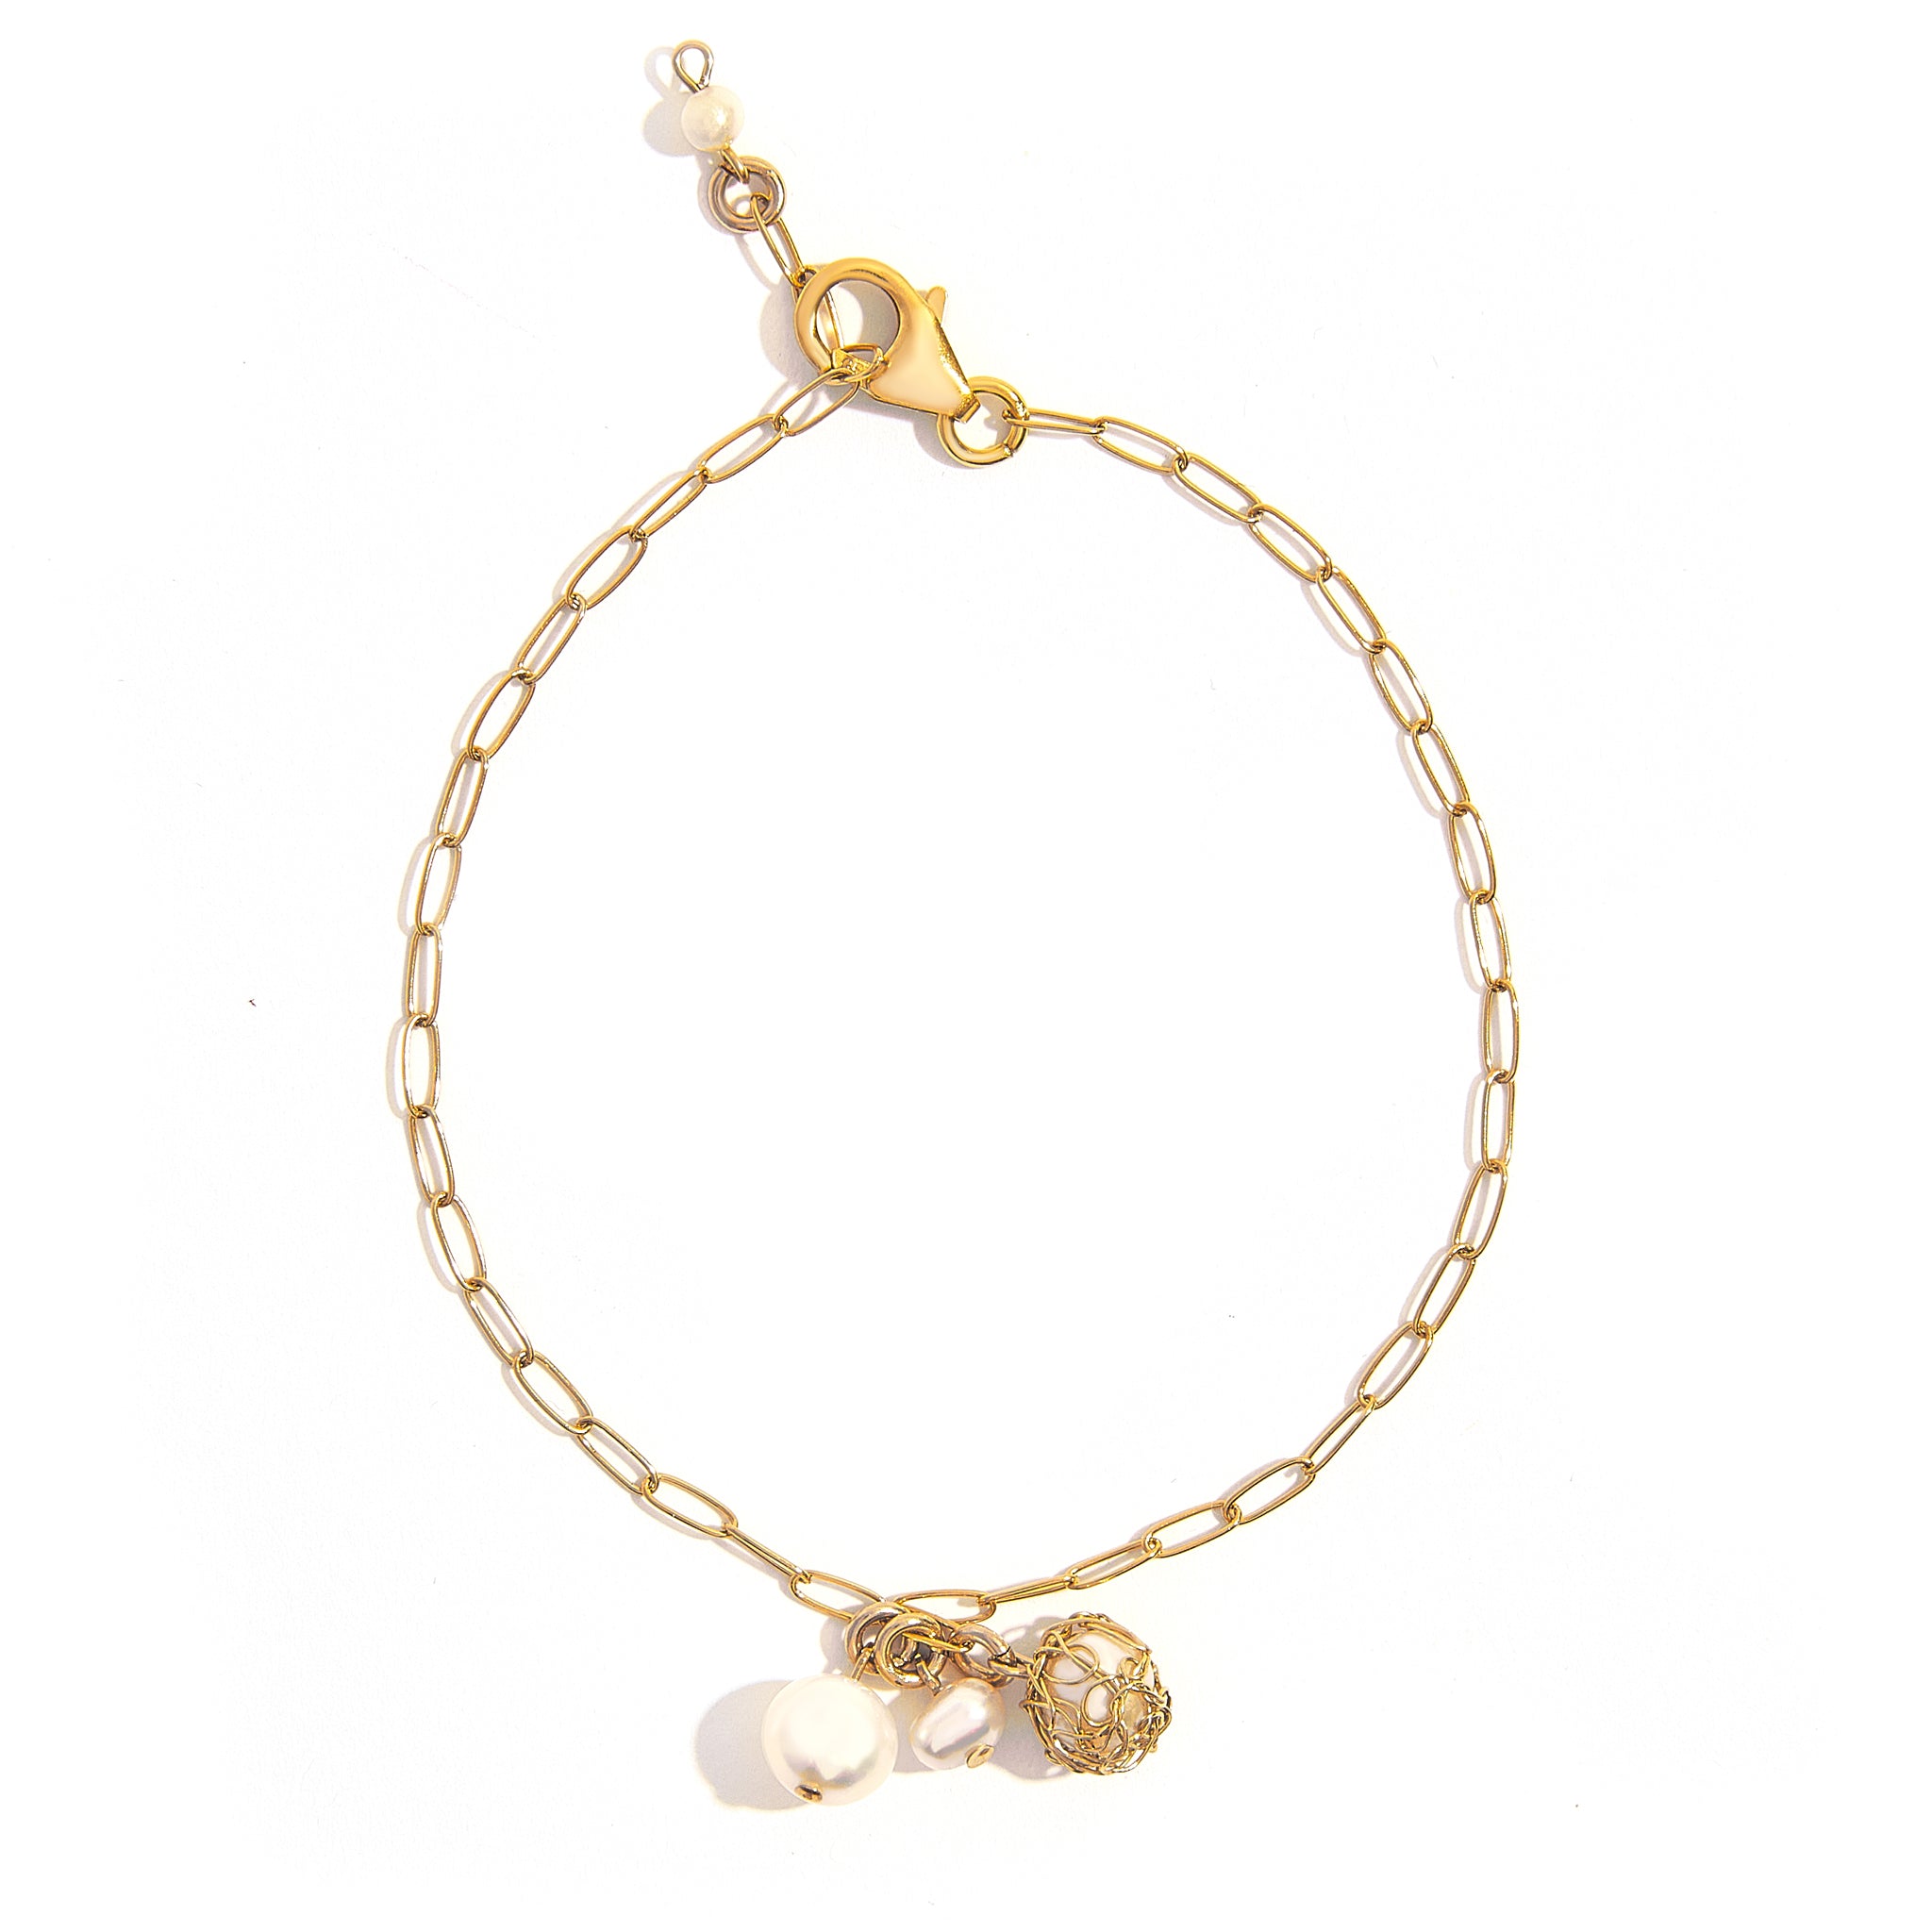 Pearly Knit Link Bracelett is set in high-quality goldfield, which combines a durable gold layer with a base metal for an elegant and long-lasting finish.  Pearls Included: Three pearls measuring 6-6.5mm One pearl measuring 4-4.5mm One pearl measuring 7-7.5mm One pearl measuring 6-6.5mm  If you have any questions please&nbsp;contact us directly&nbsp;hello@seoidin.com